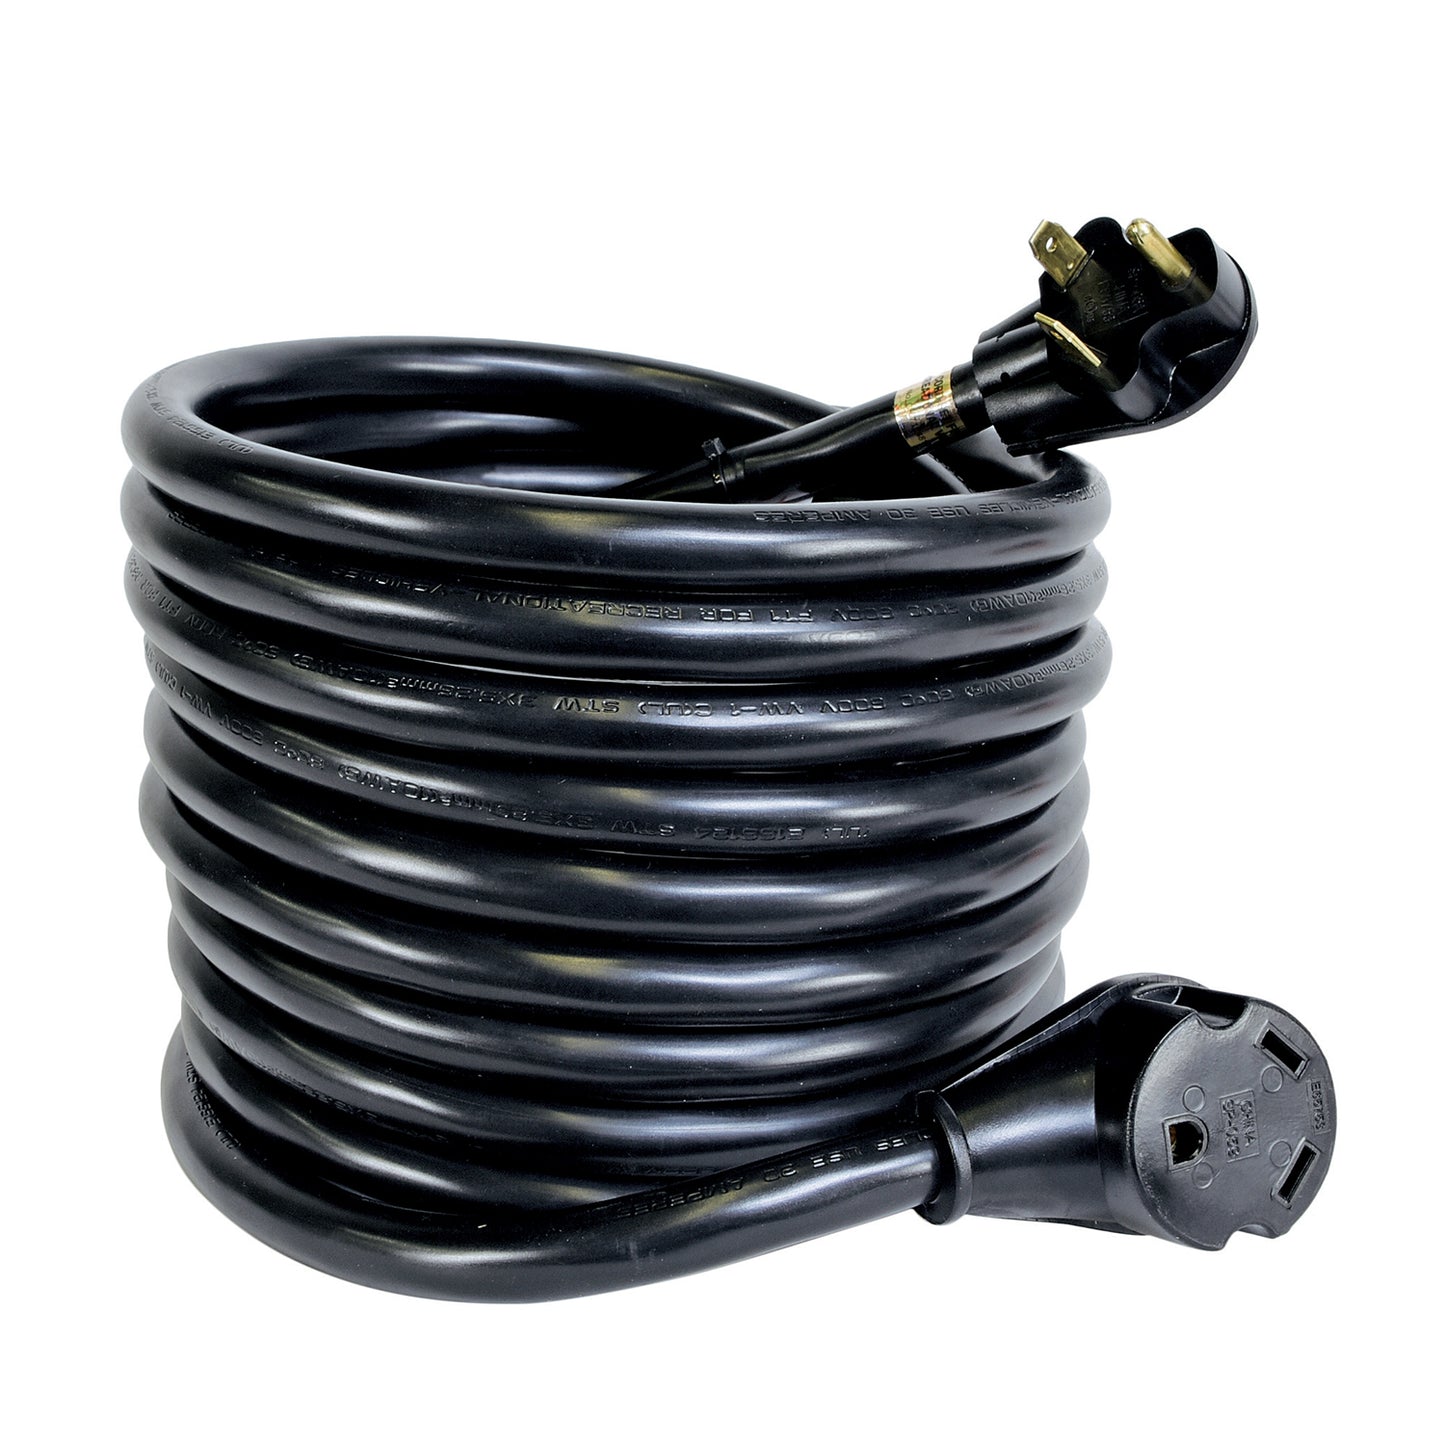 ARCON - 14248: EXTENSION CORD 30A 25FT